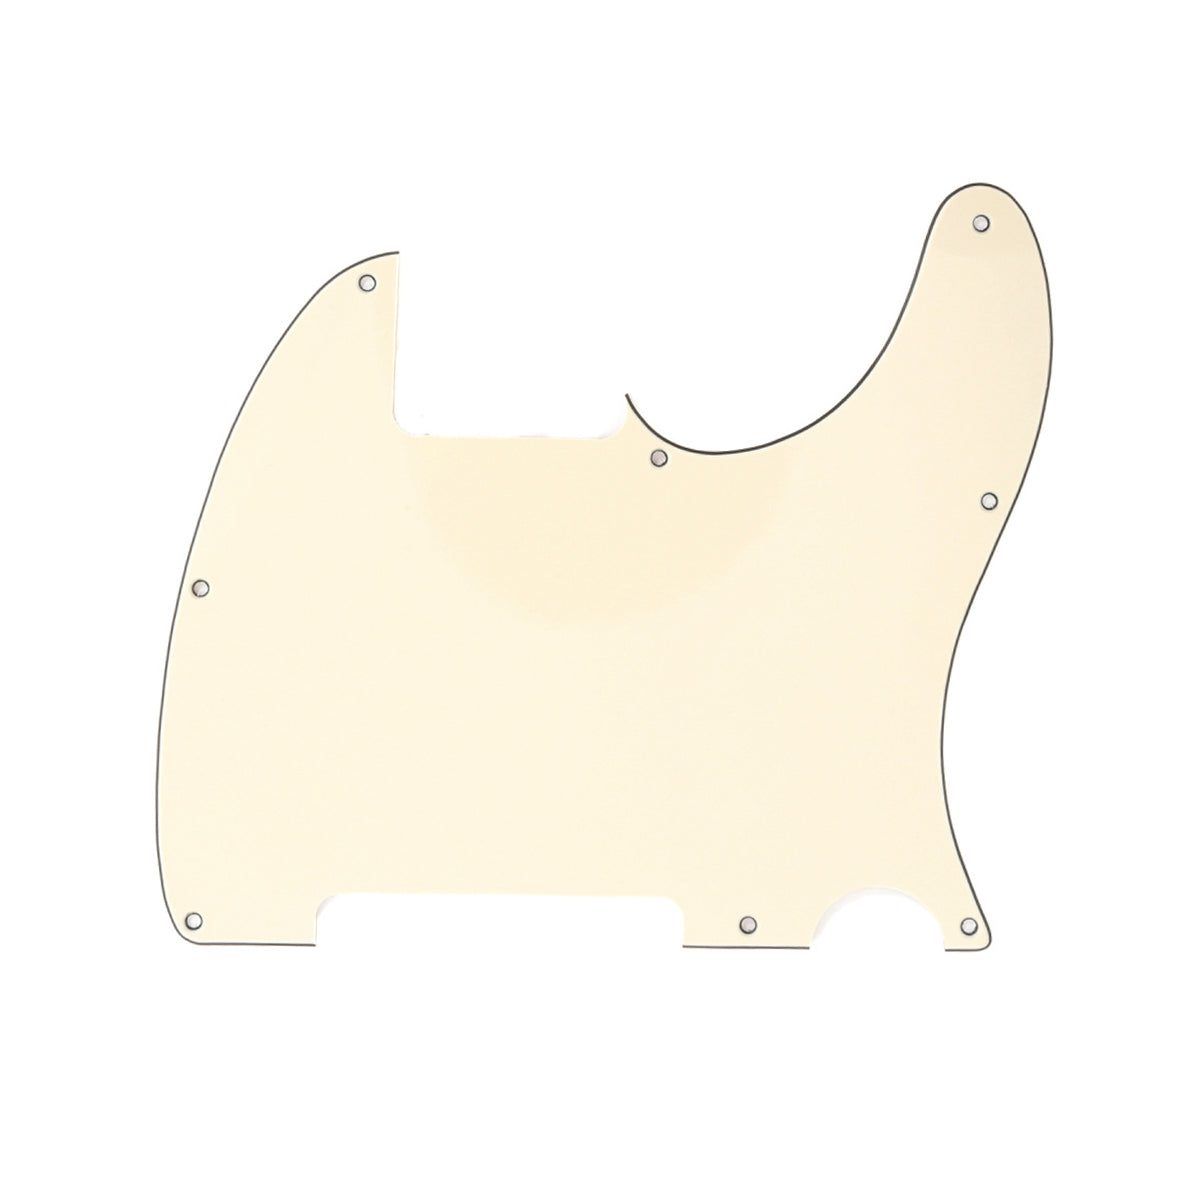 Musiclily 8 Hole Tele Pickguard Blank for Fender USA/Mexican Telecaster Esquire Guitar, 3Ply Cream